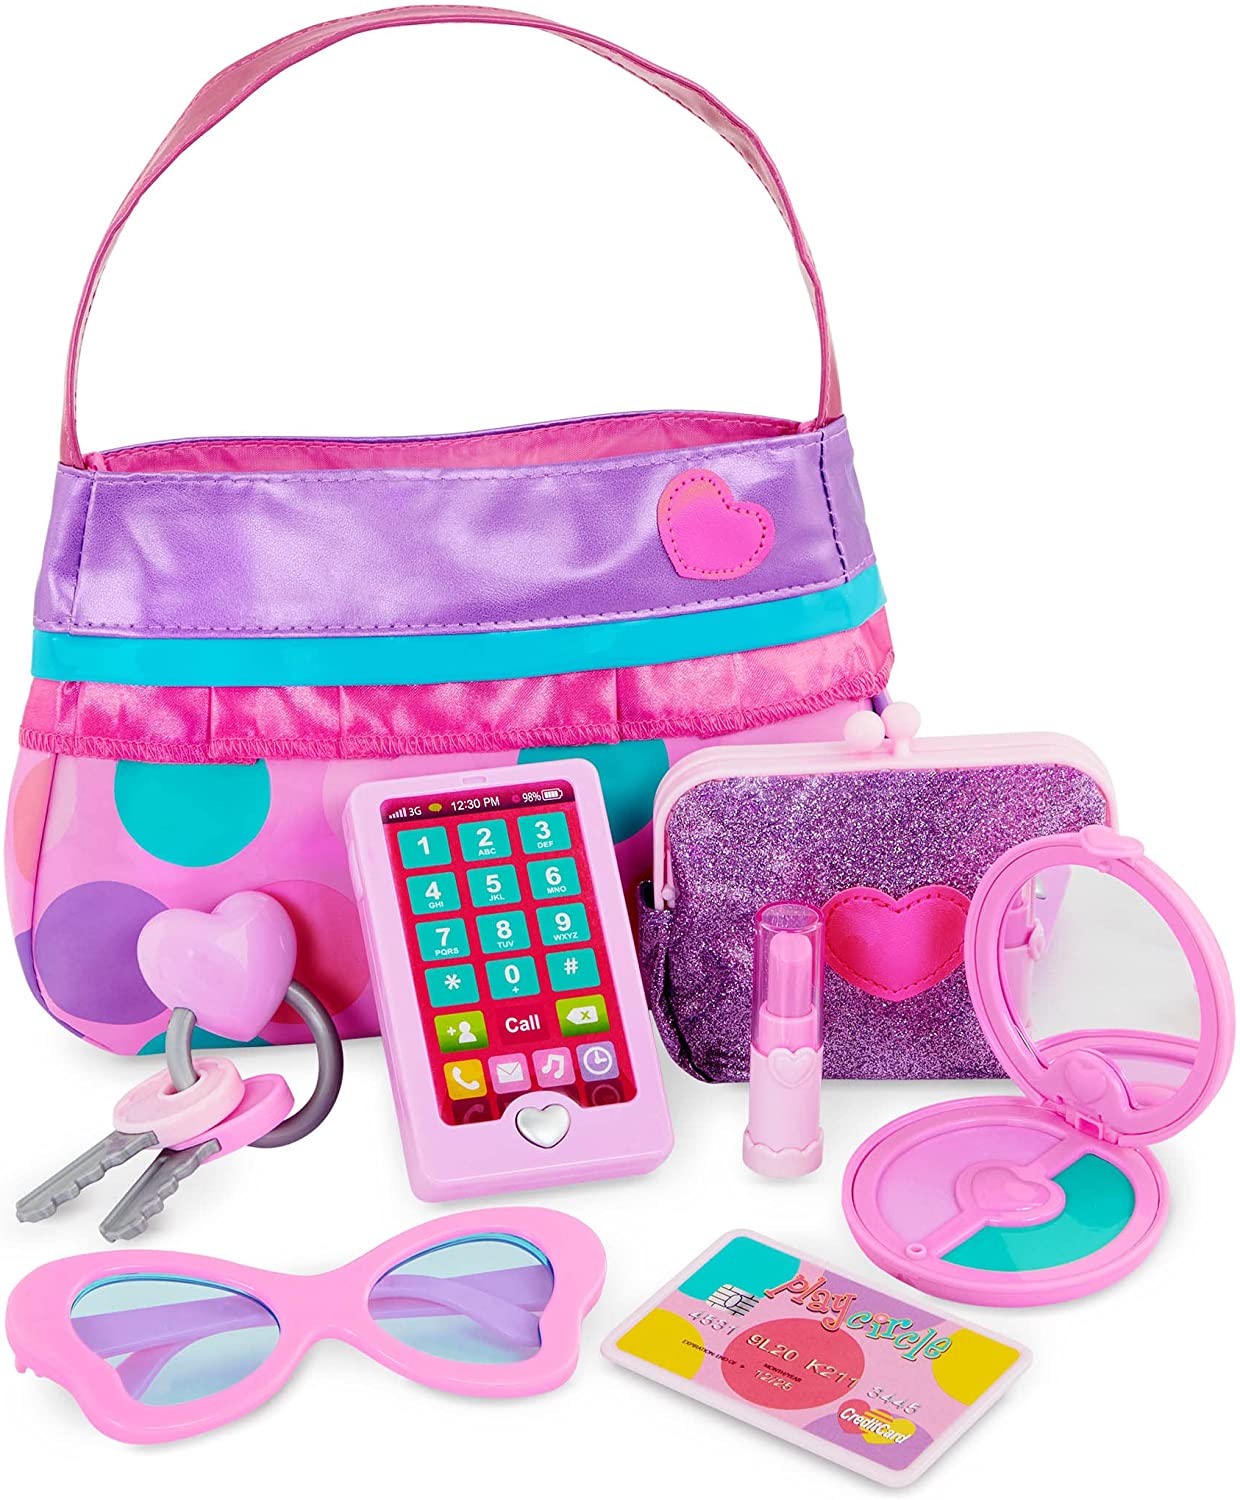 Play Circle by Battat Role Play Purse Set Toddler Girl Toys